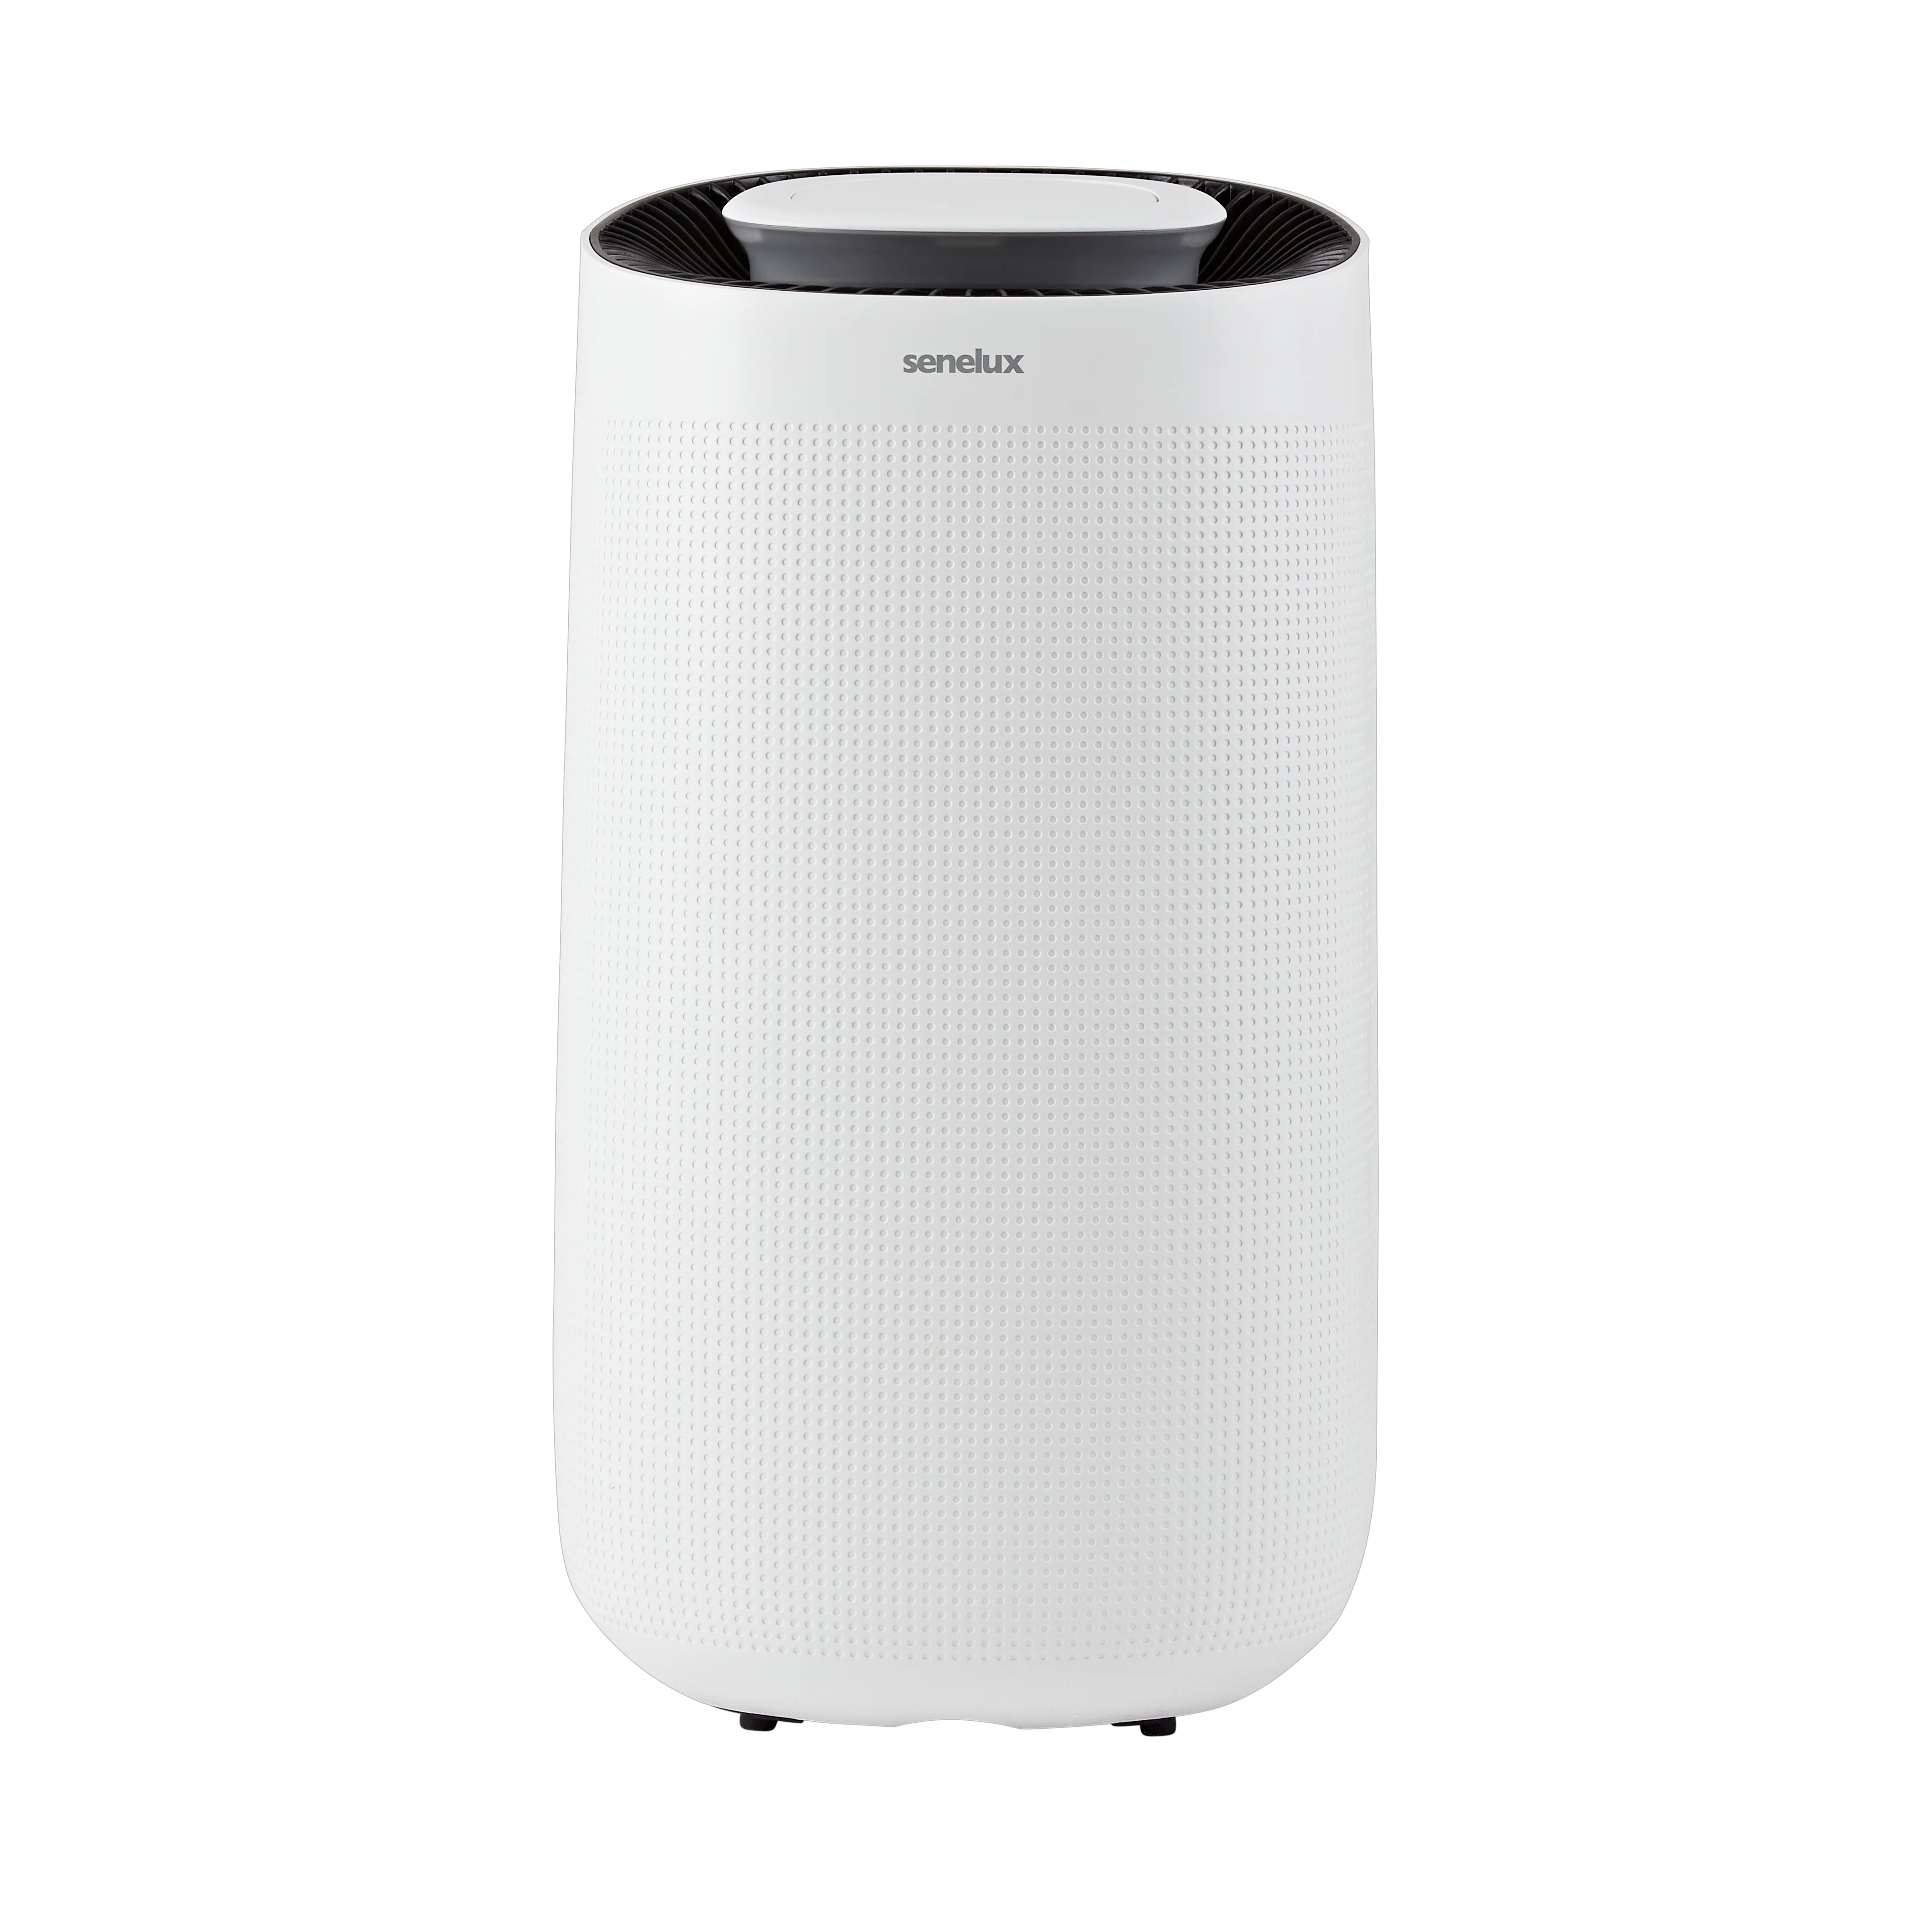 An image of an all-white Senelux 12 litre per day dehumidifier with portable wheels on the bottom.